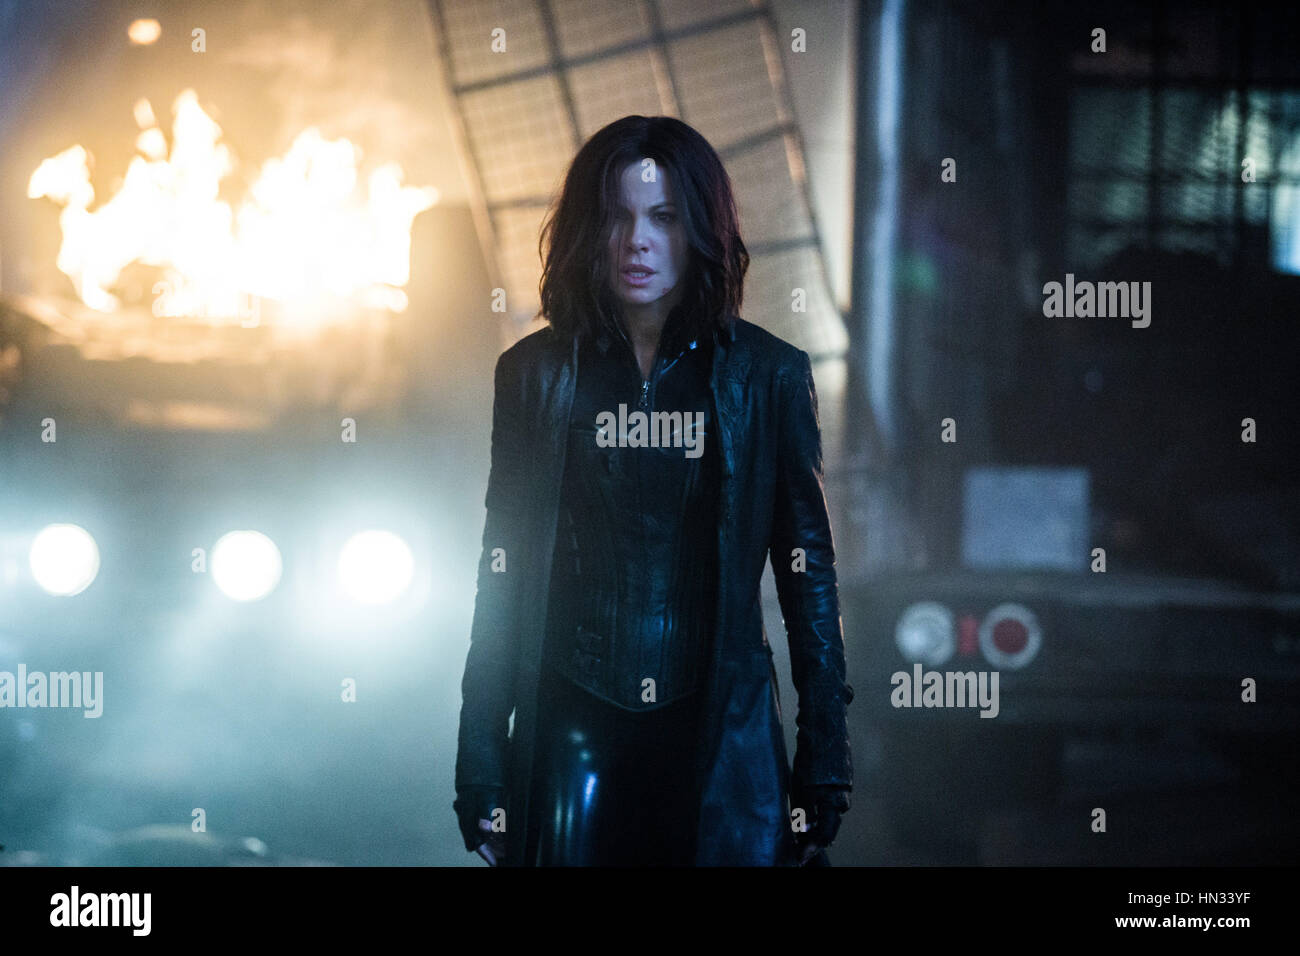 RELEASE DATE: January 6, 2017 TITLE: Underworld: Blood Wars STUDIO: Sony Pictures DIRECTOR: Anna Foerster PLOT: Vampire death dealer, Selene (Kate Beckinsale) fights to end the eternal war between the Lycan clan and the Vampire faction that betrayed her STARRING: Kate Beckinsale as Selene (Credit Image: © Sony Pictures/Entertainment Pictures) Stock Photo